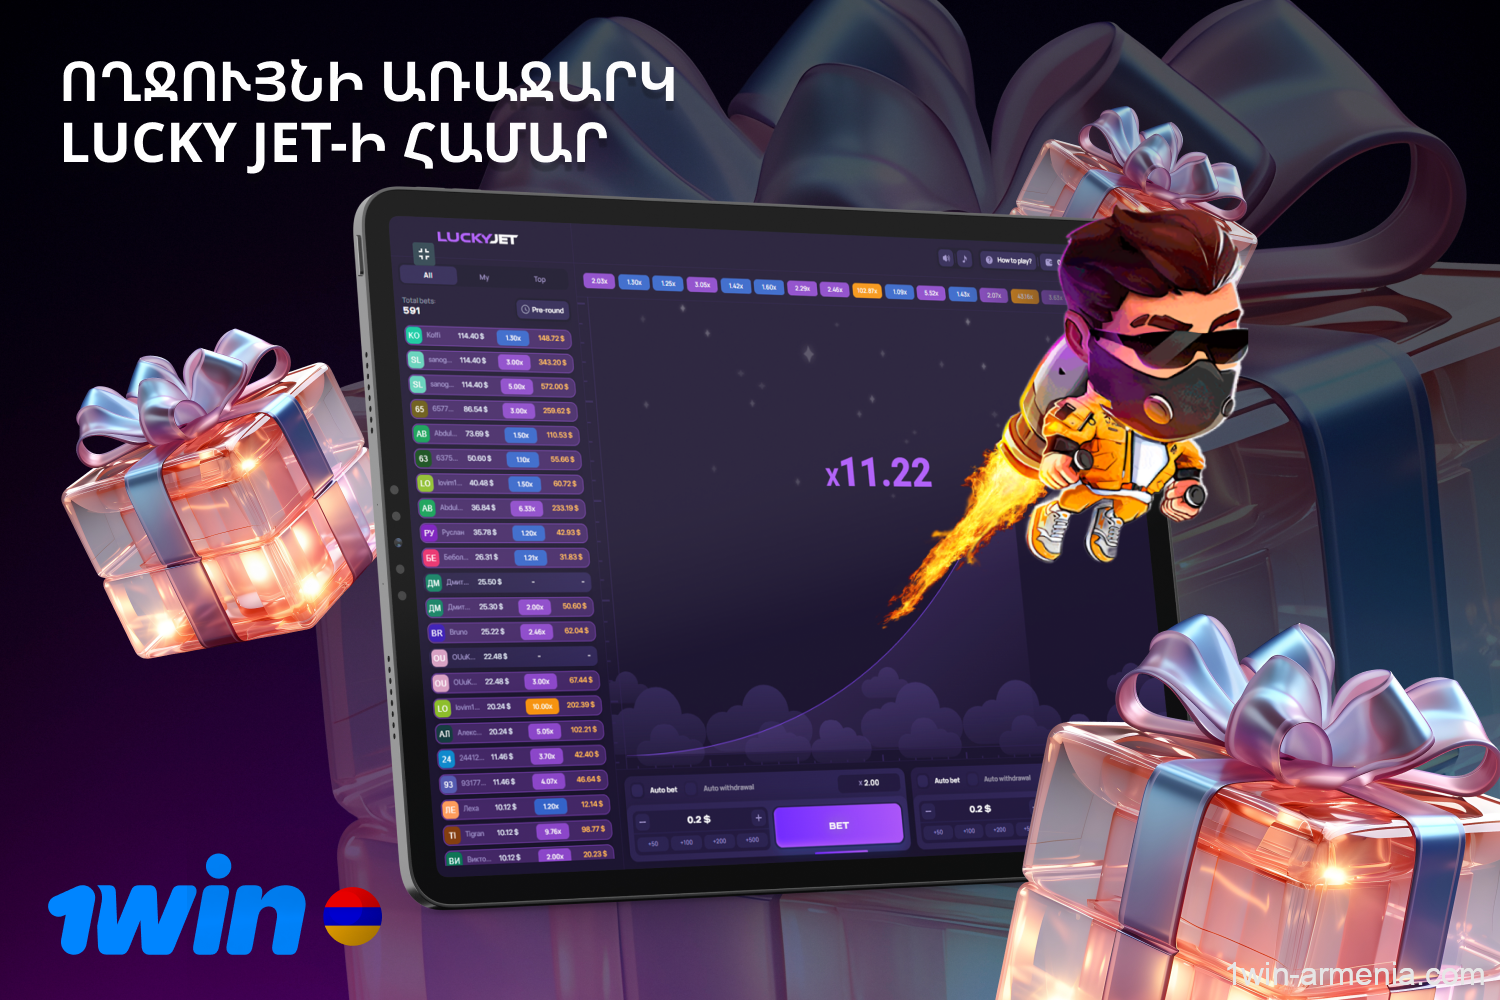 After registration, new users from Armenia can get a welcome bonus at Lucky Jet 1win